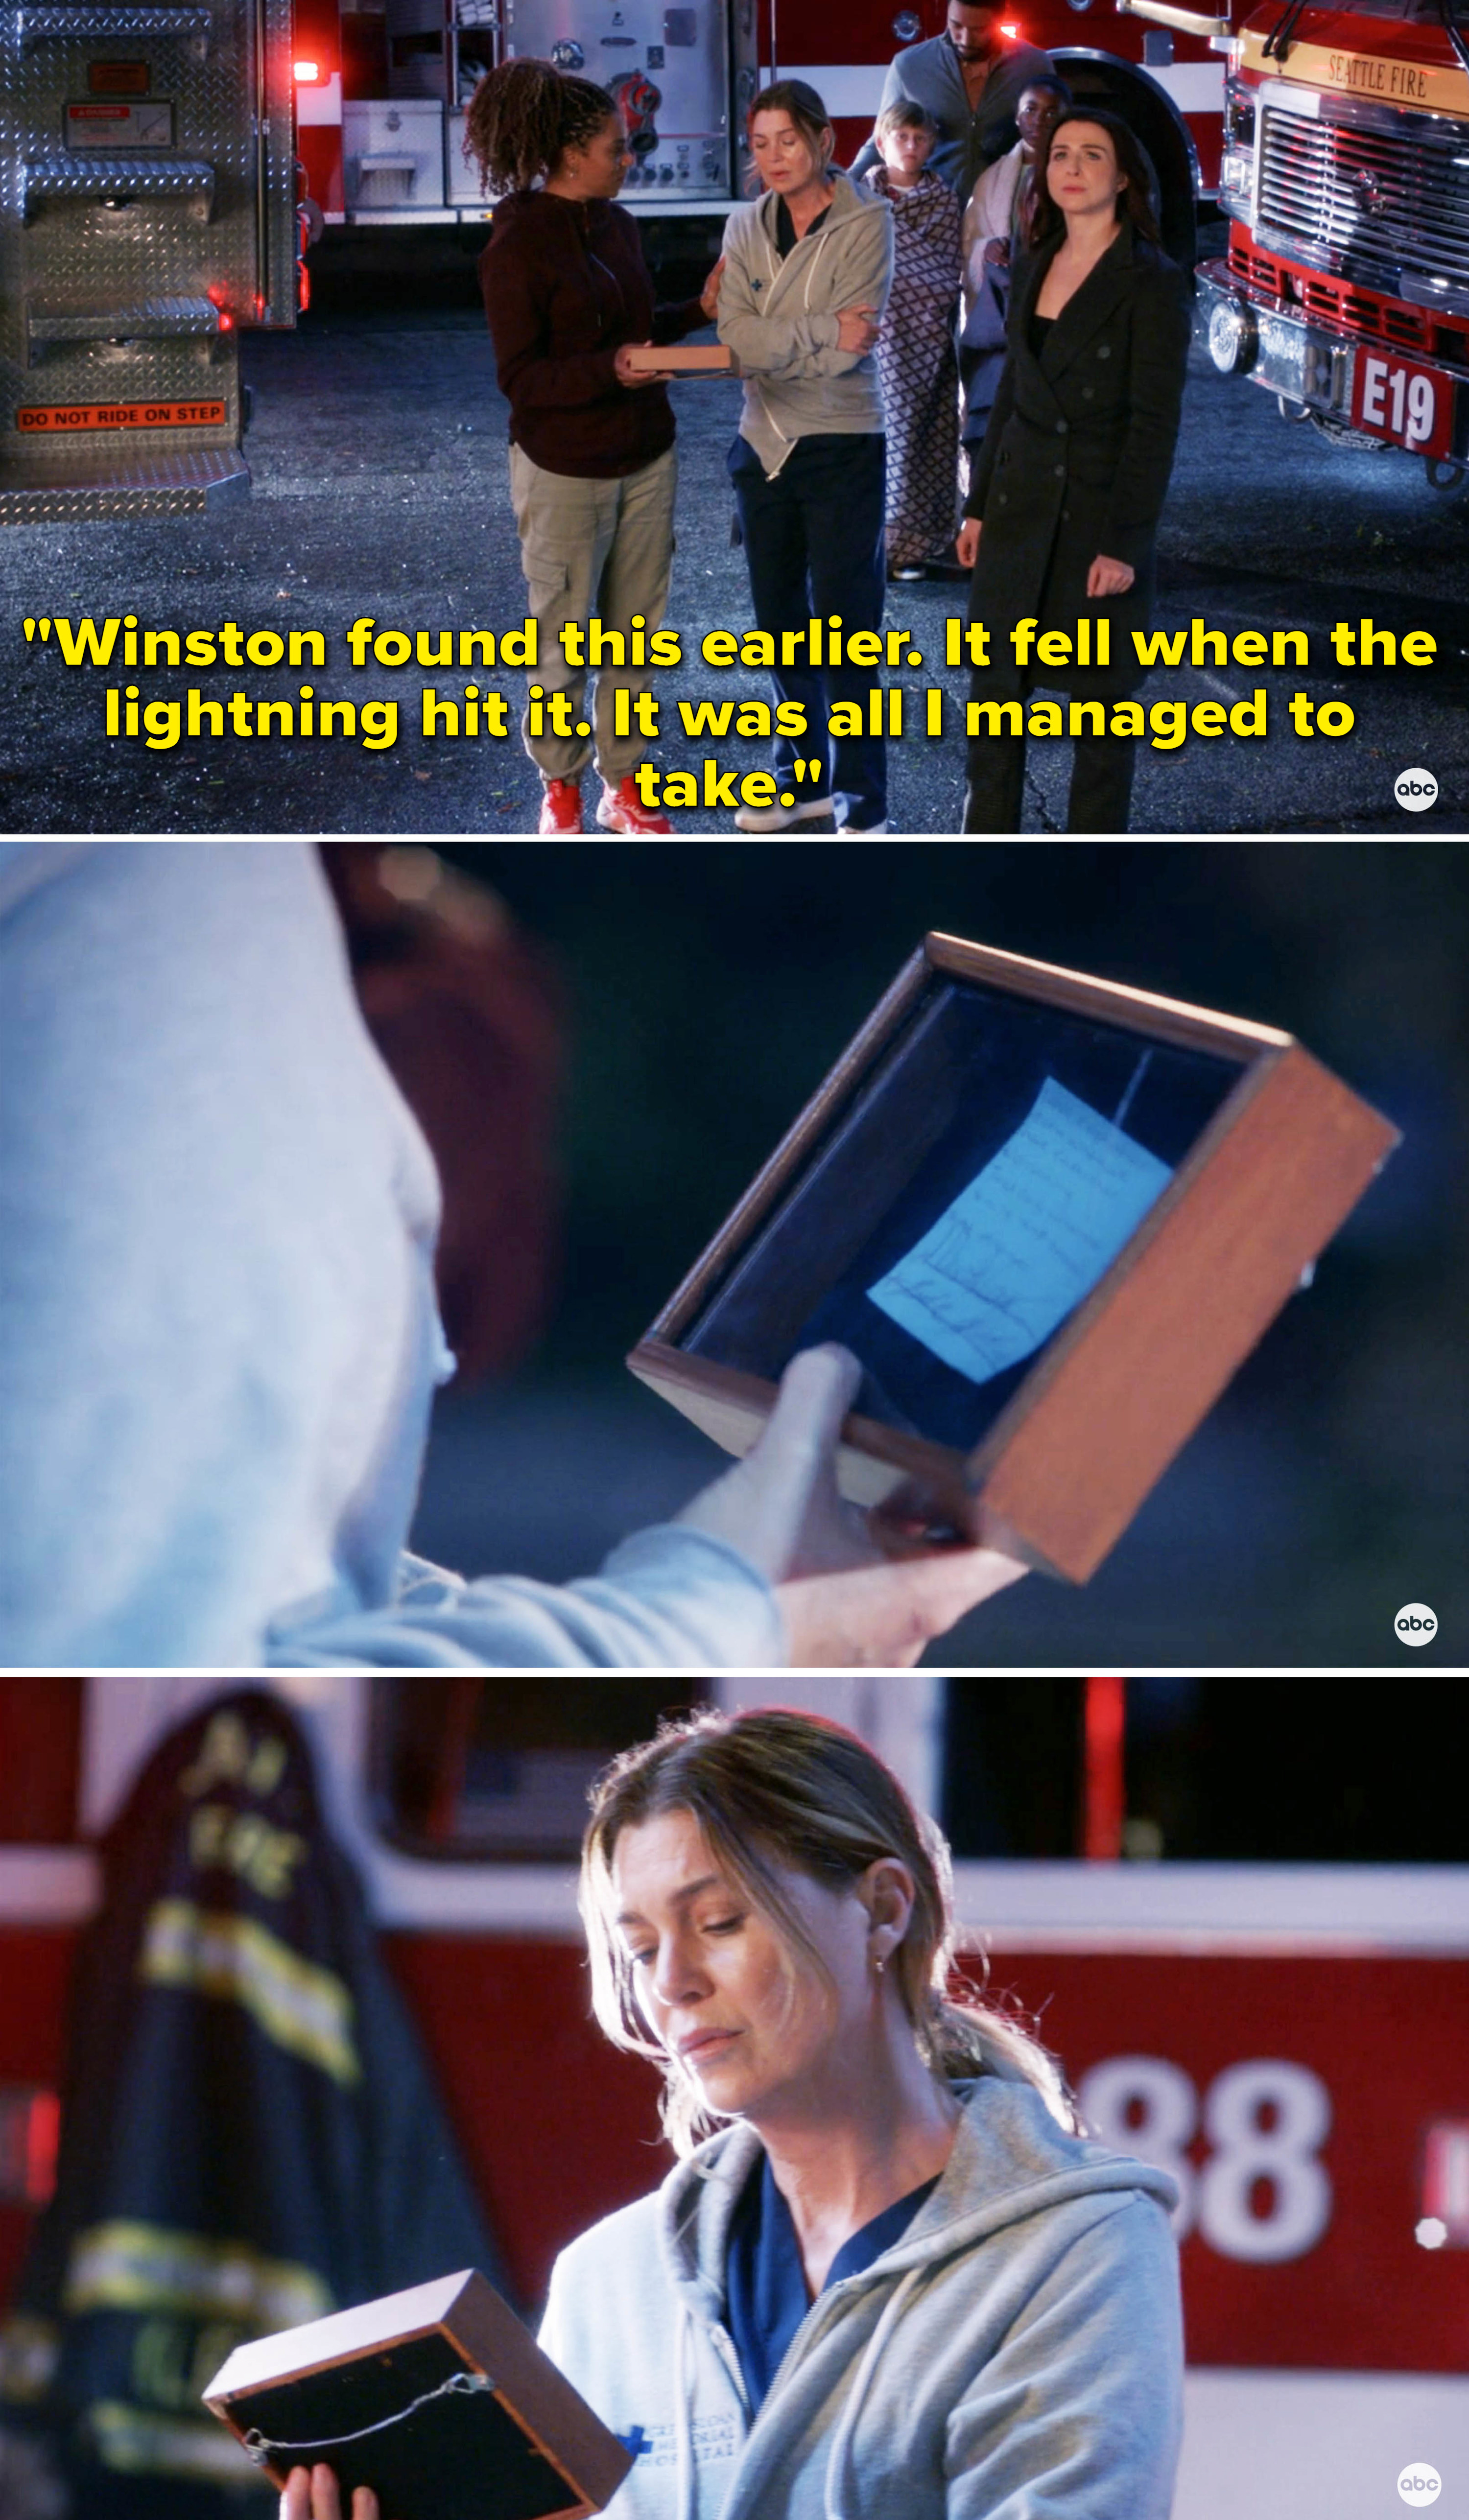 Maggie giving Meredith the framed Post-it note